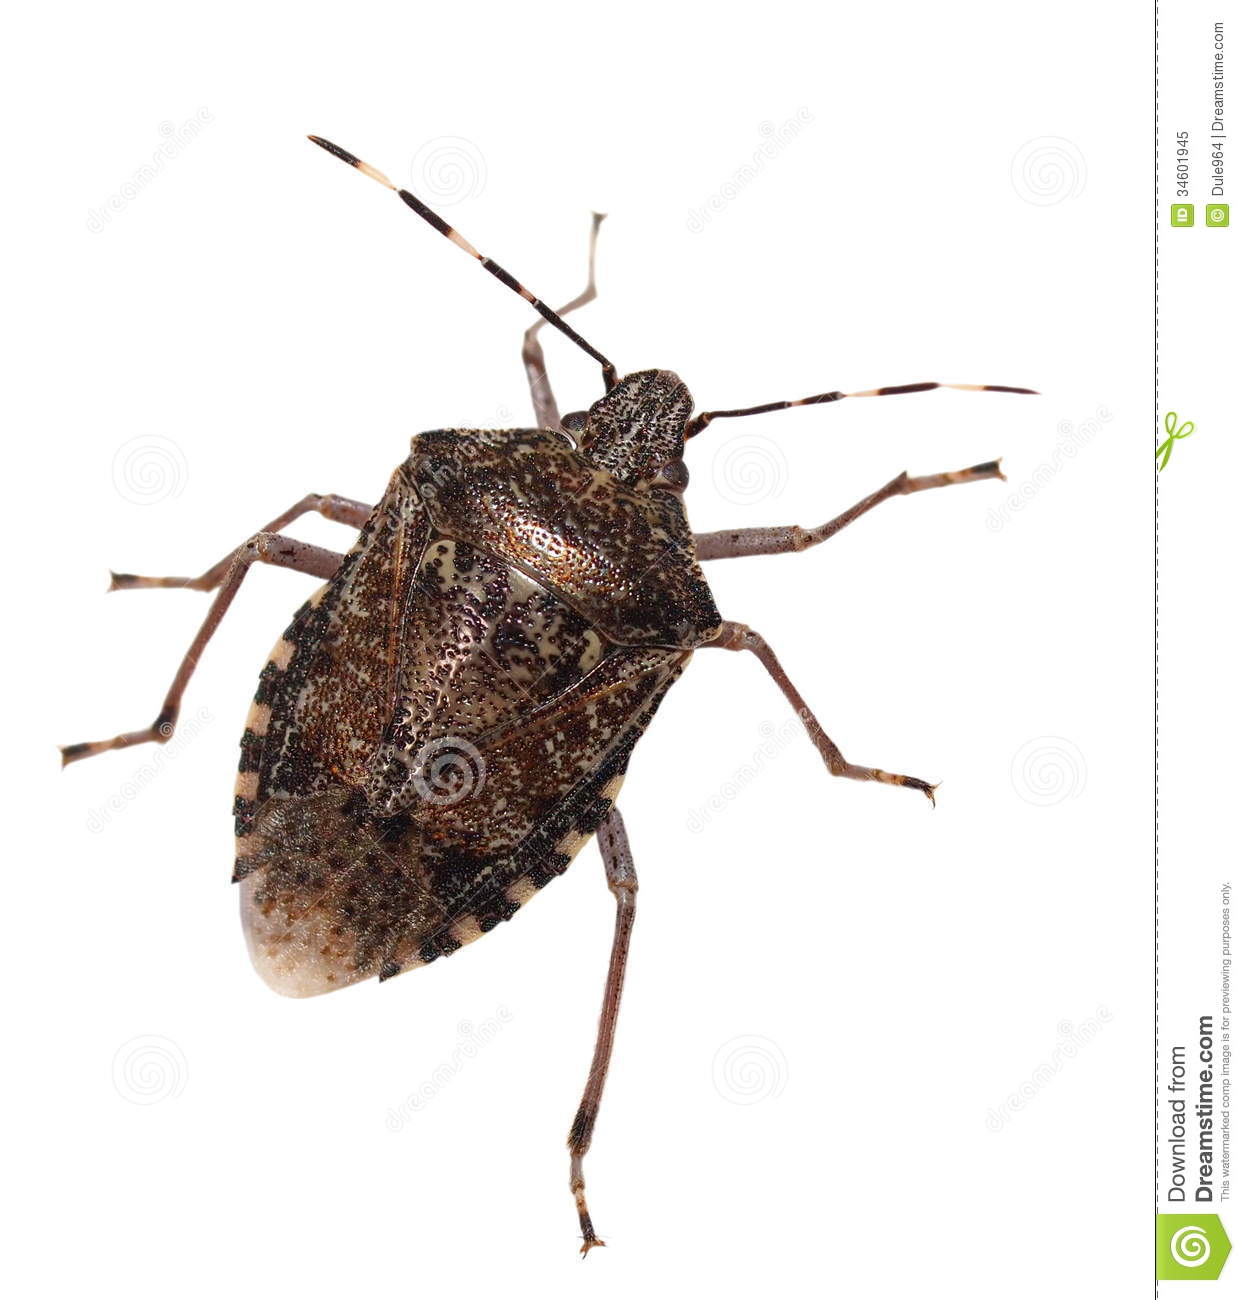 Brown Marmorated Stink Bug Isolated On White Background With Clipping